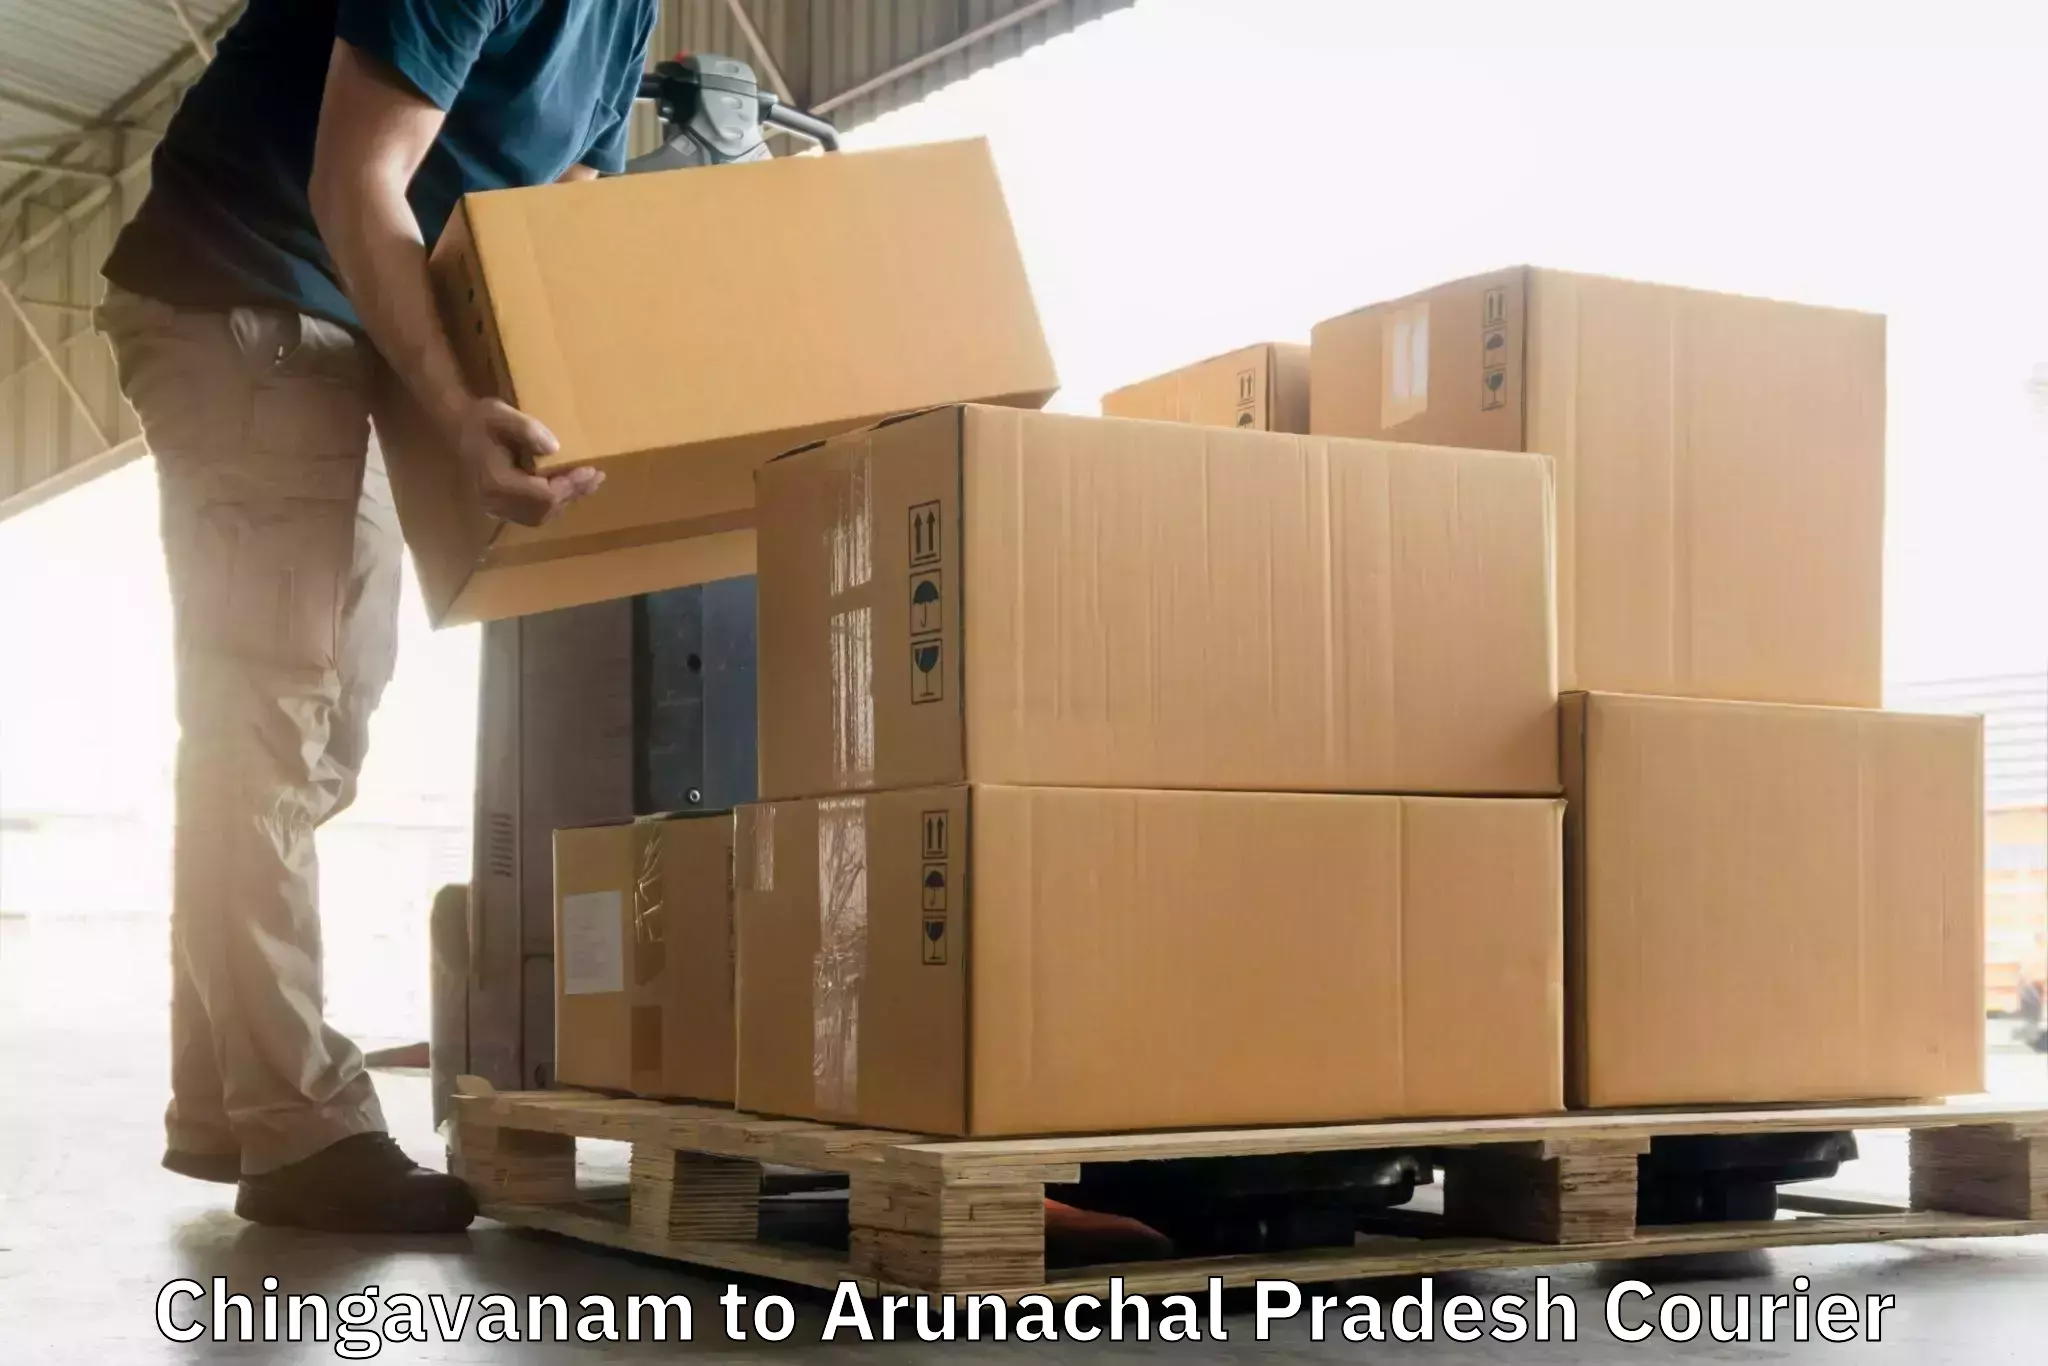 Reliable parcel services Chingavanam to Changlang